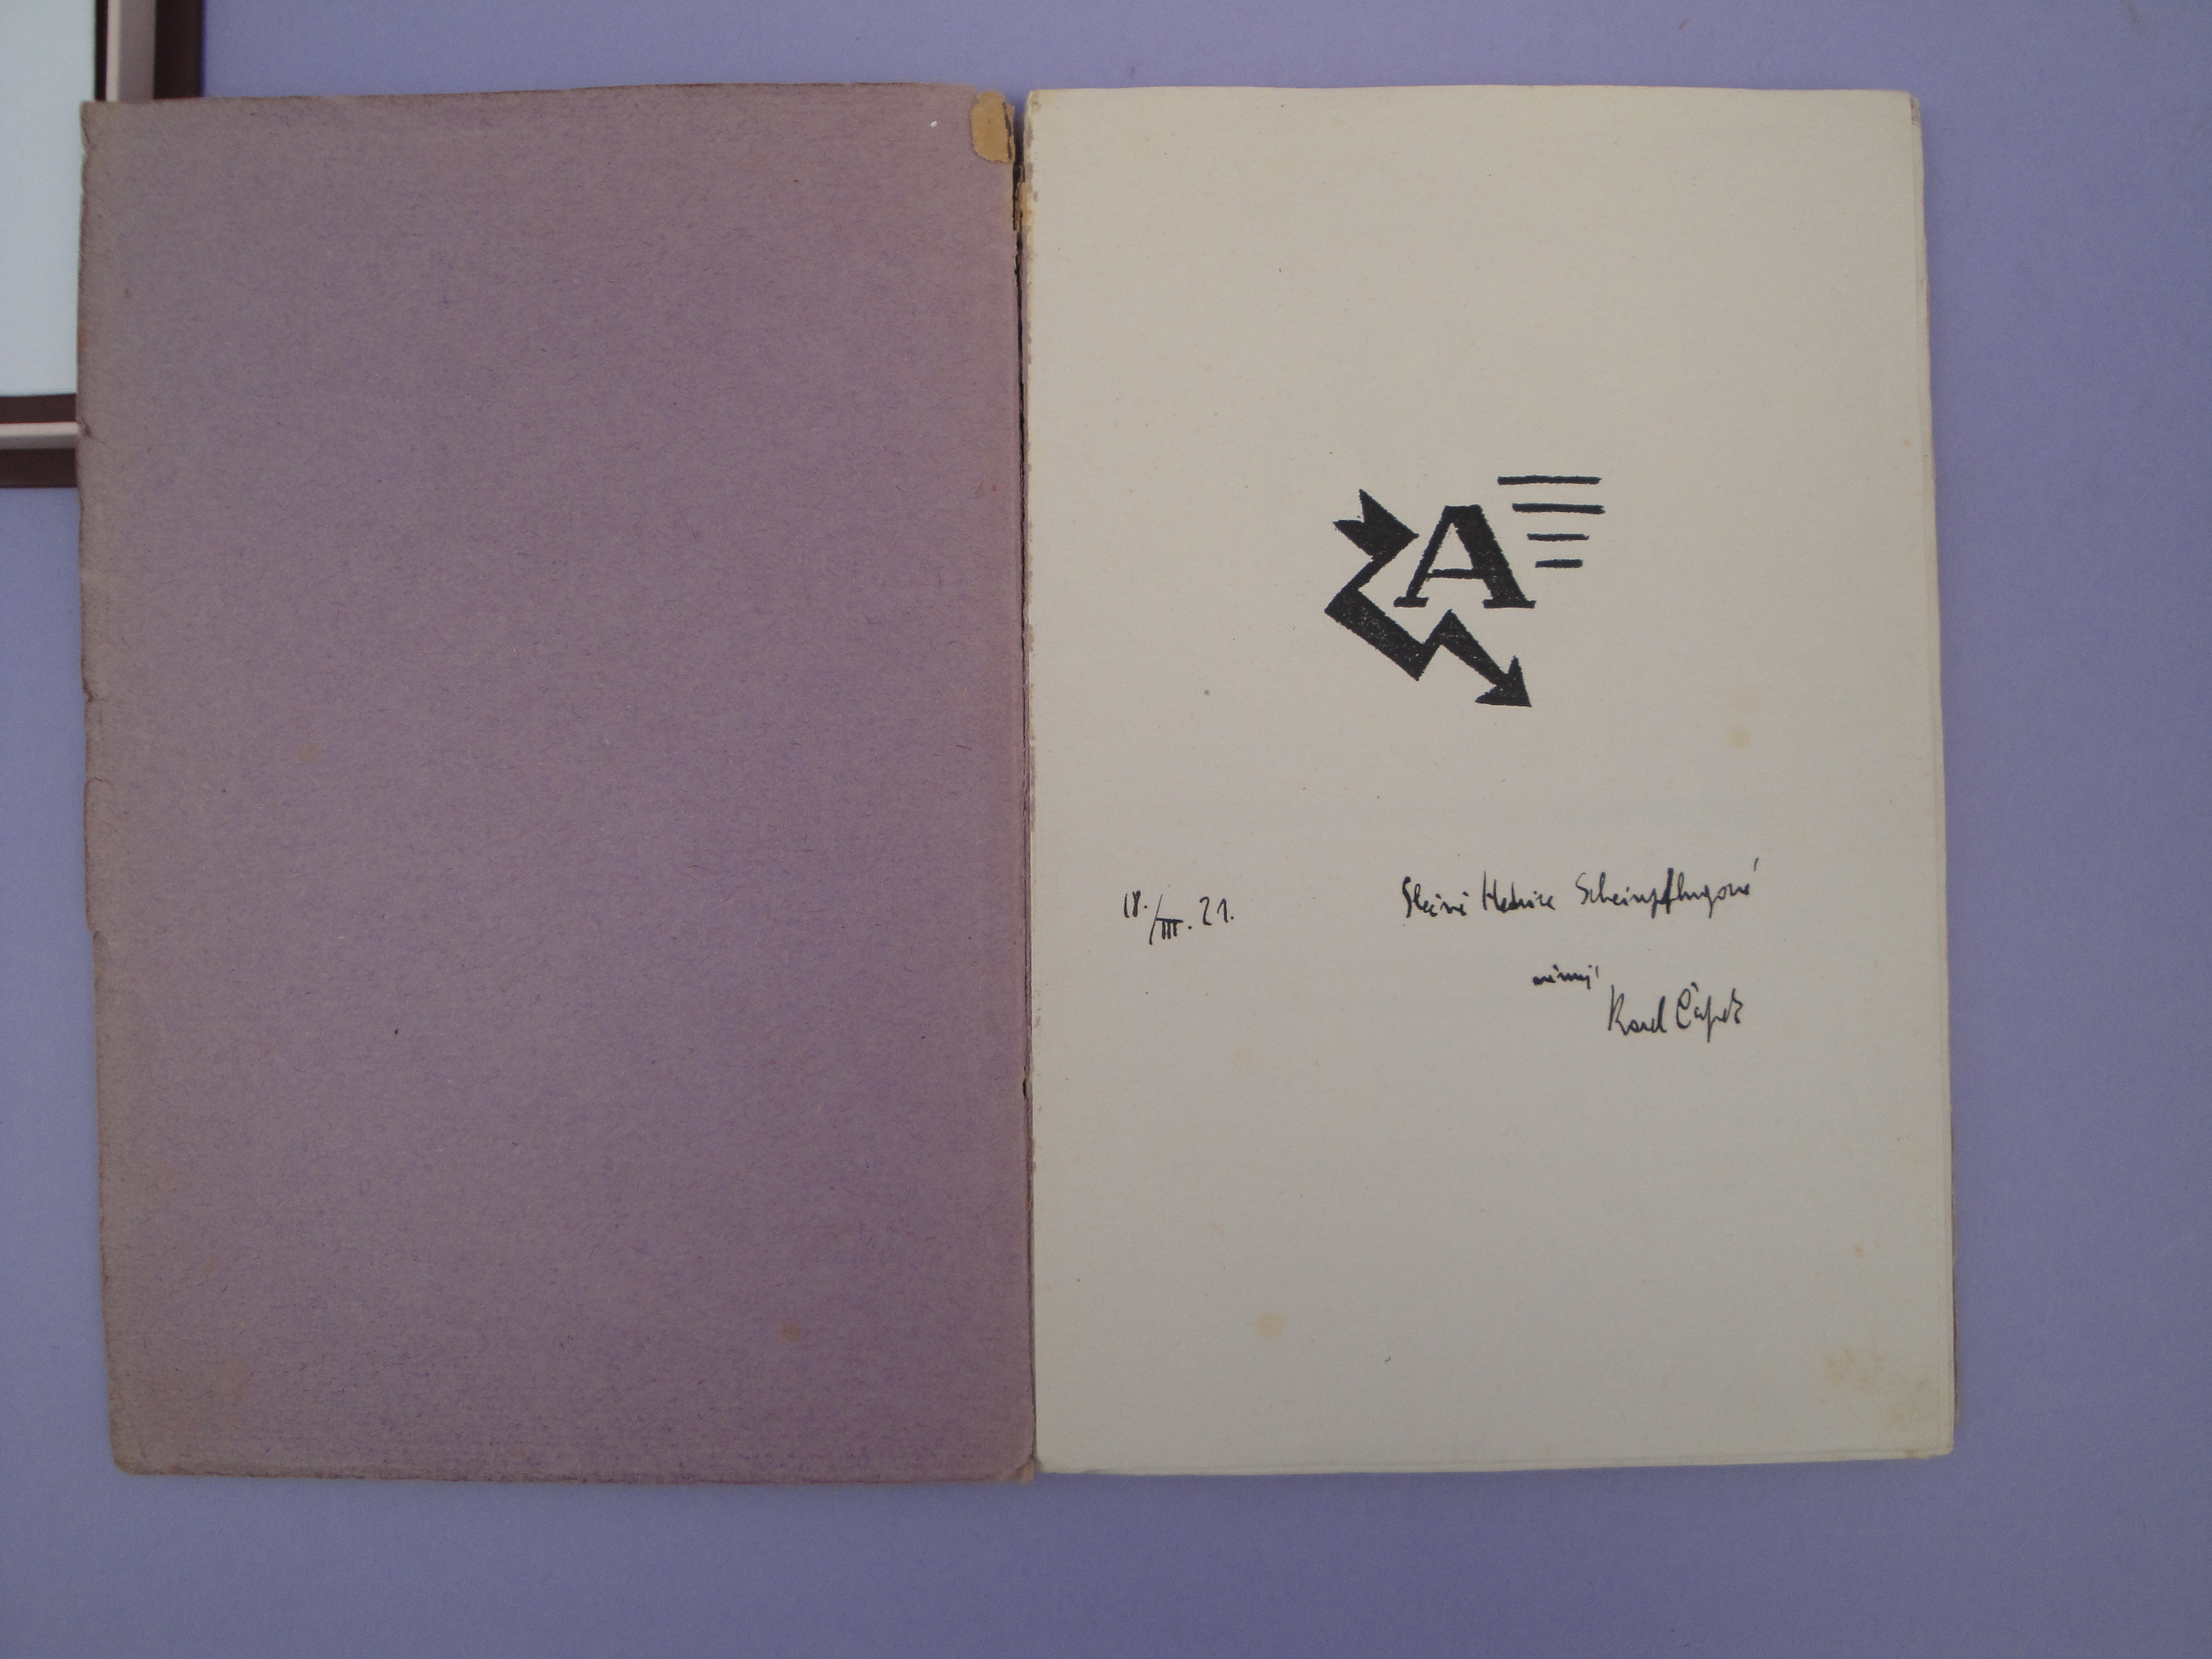 This copy of the first edition of R.U.R. was inscribed by Capek.